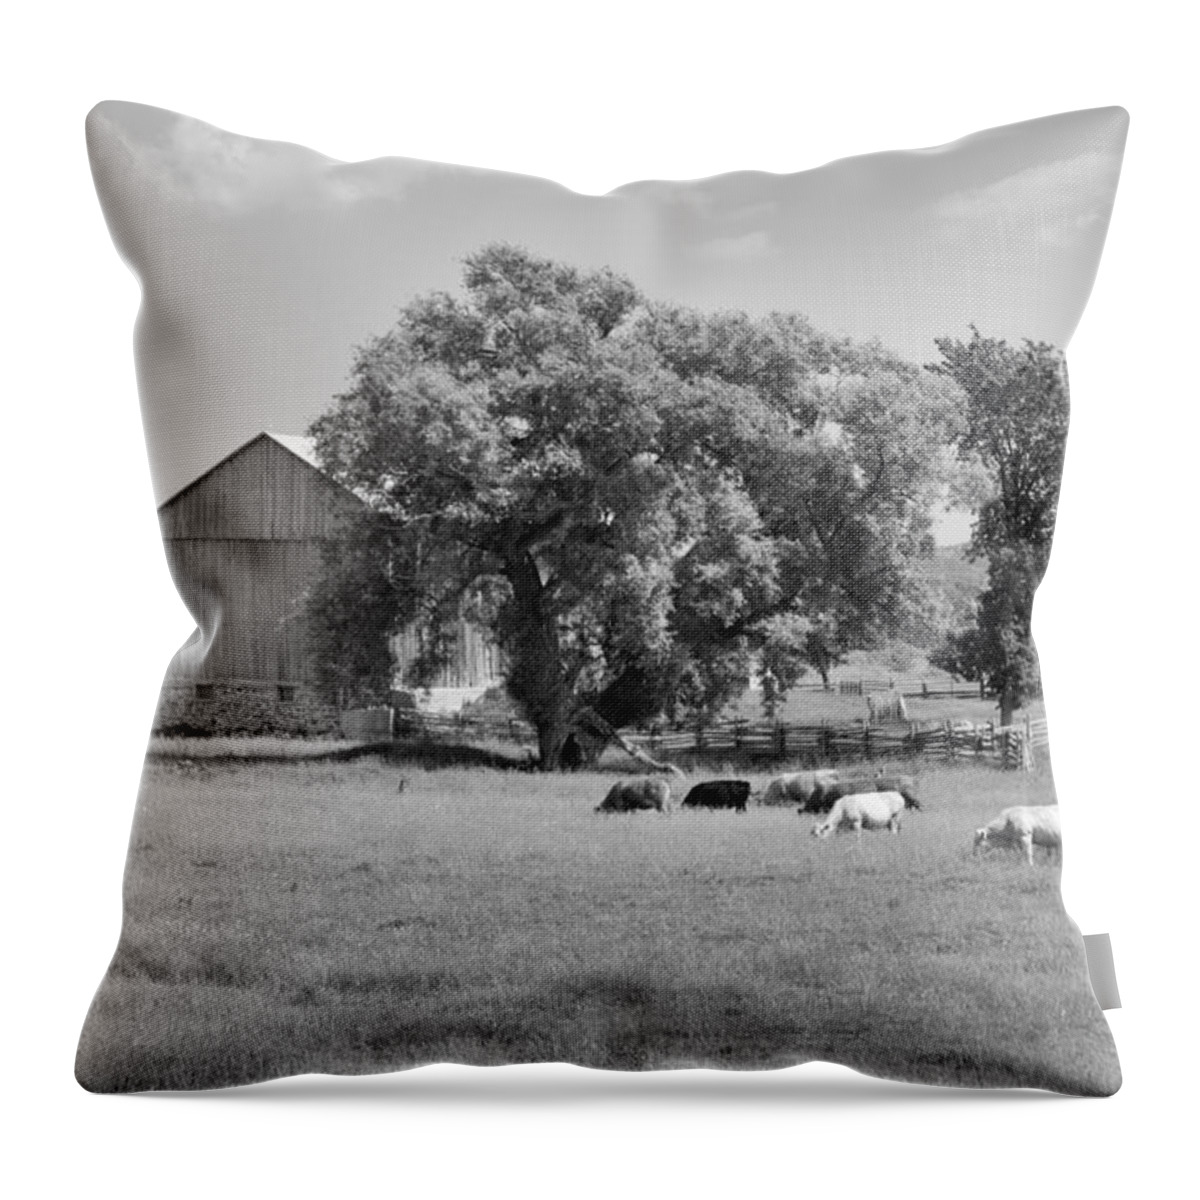 Barn Throw Pillow featuring the photograph Reive Blvd Barn 15059b by Guy Whiteley